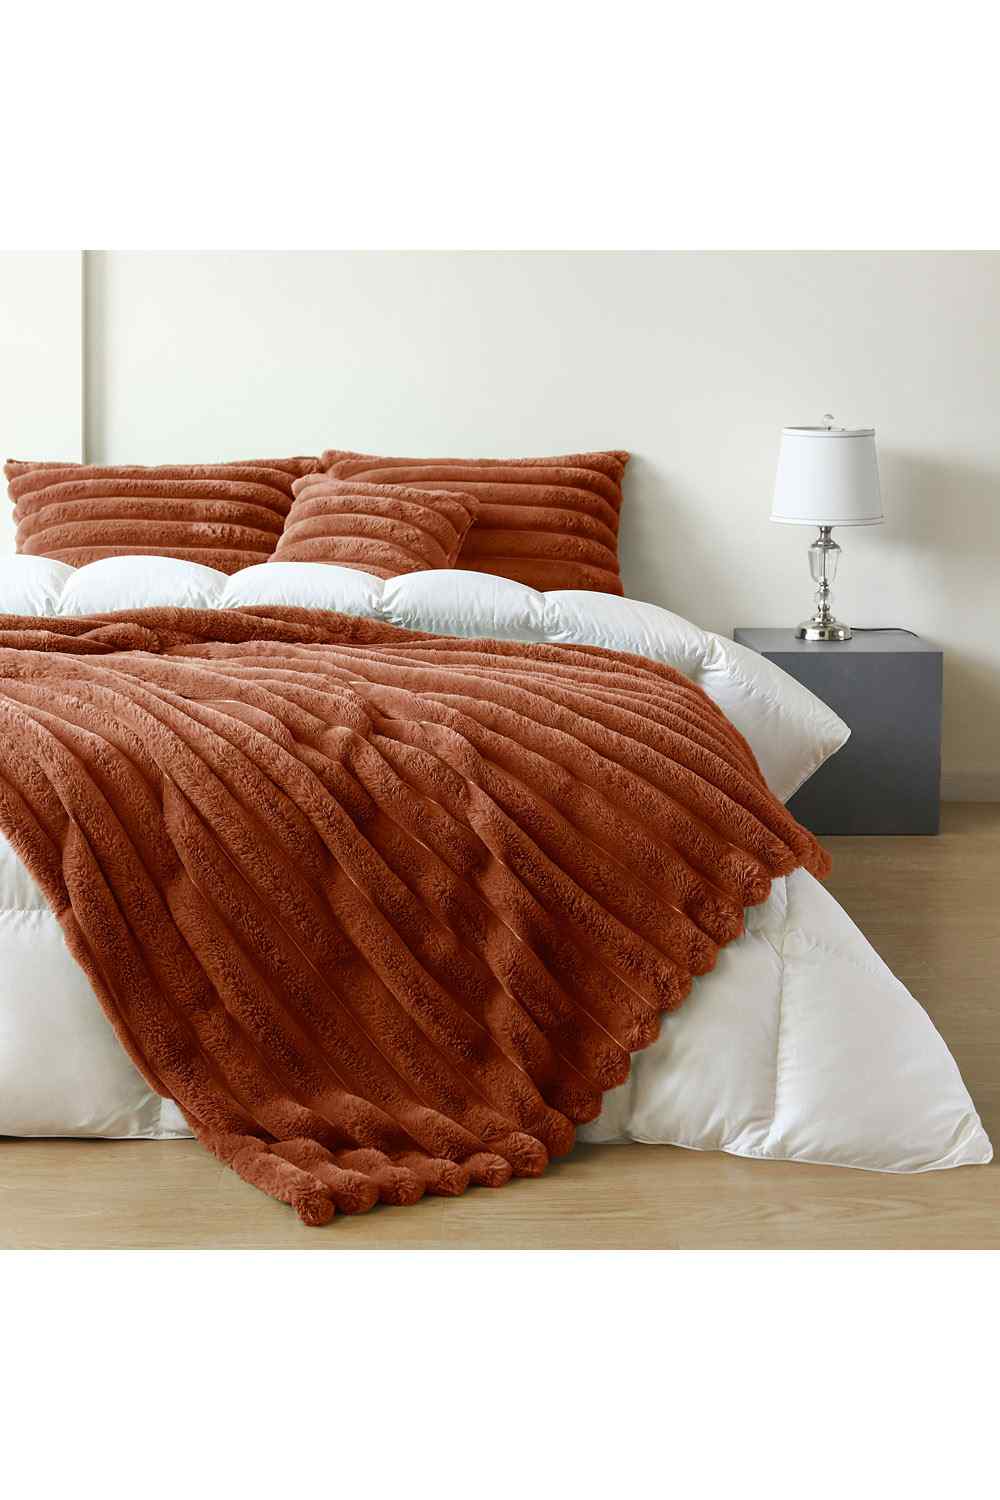 The Home Collection Cord Throw - Orange 1 Shaws Department Stores